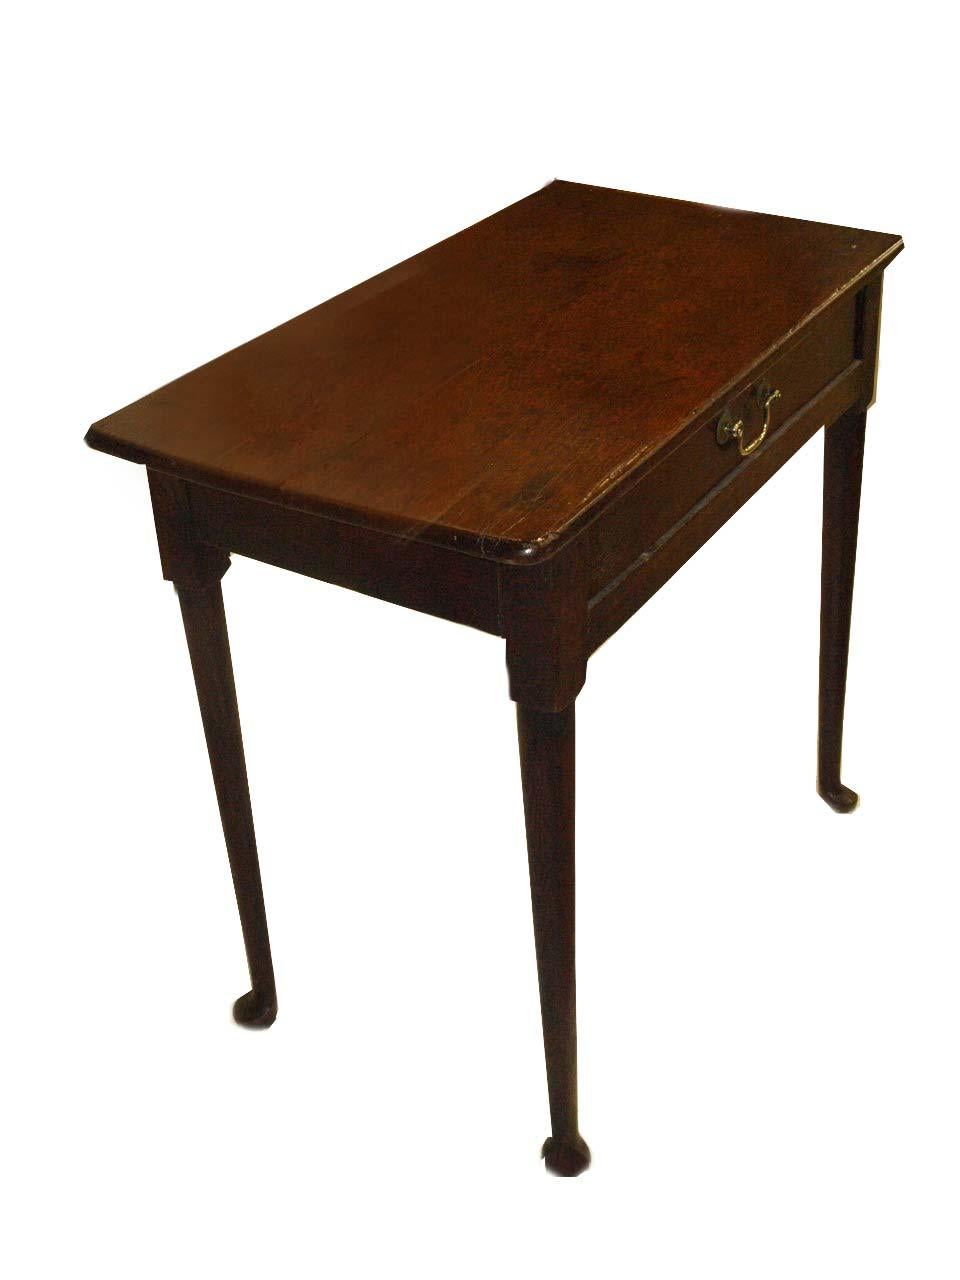 Queen Anne oak one drawer table dating to the early 1700's. This one drawer table has nicely shaped legs ending with pad feet. The brass handle has been replaced (it probably had a tear drop pull originally).